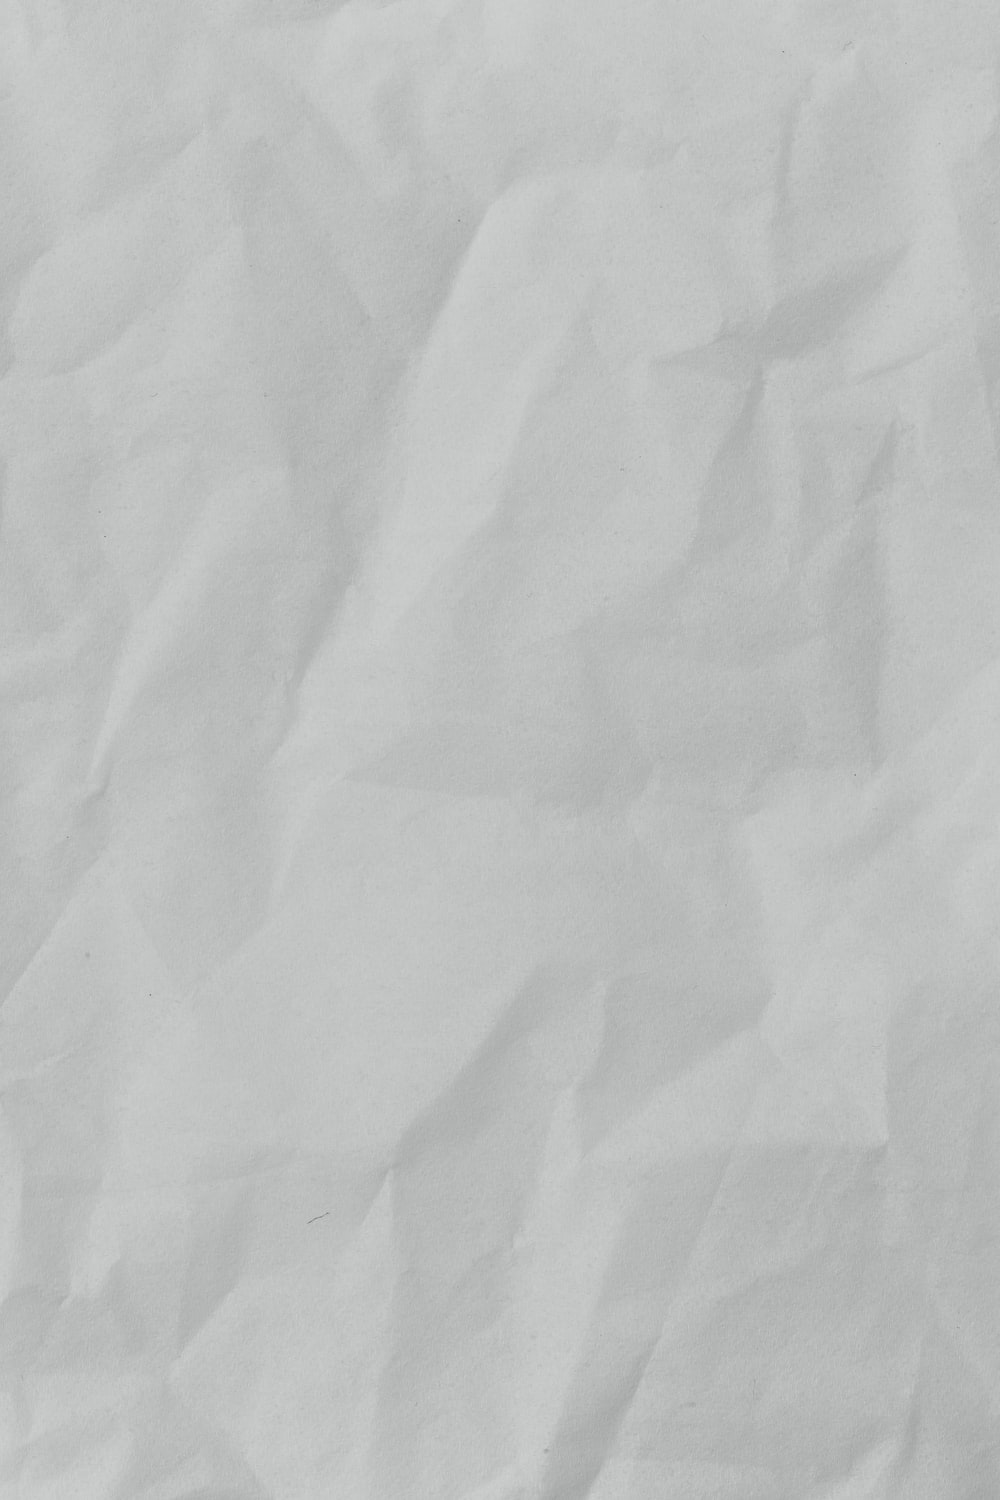 Paper Background Image HD Background